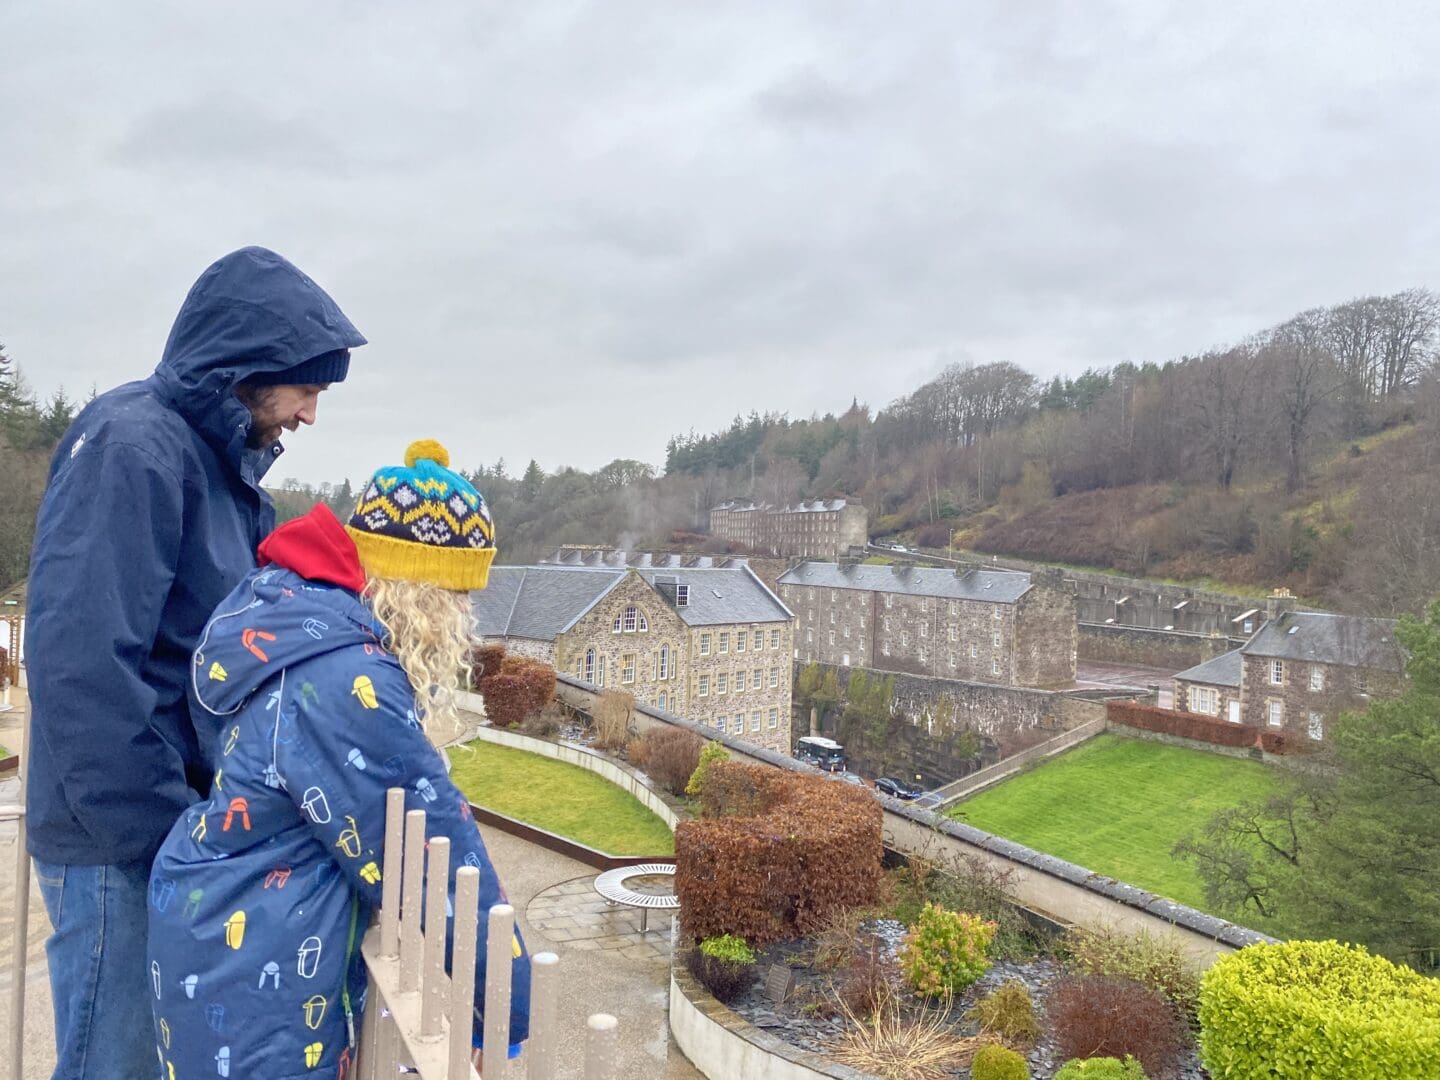 Child and adult looking down at New Lanark